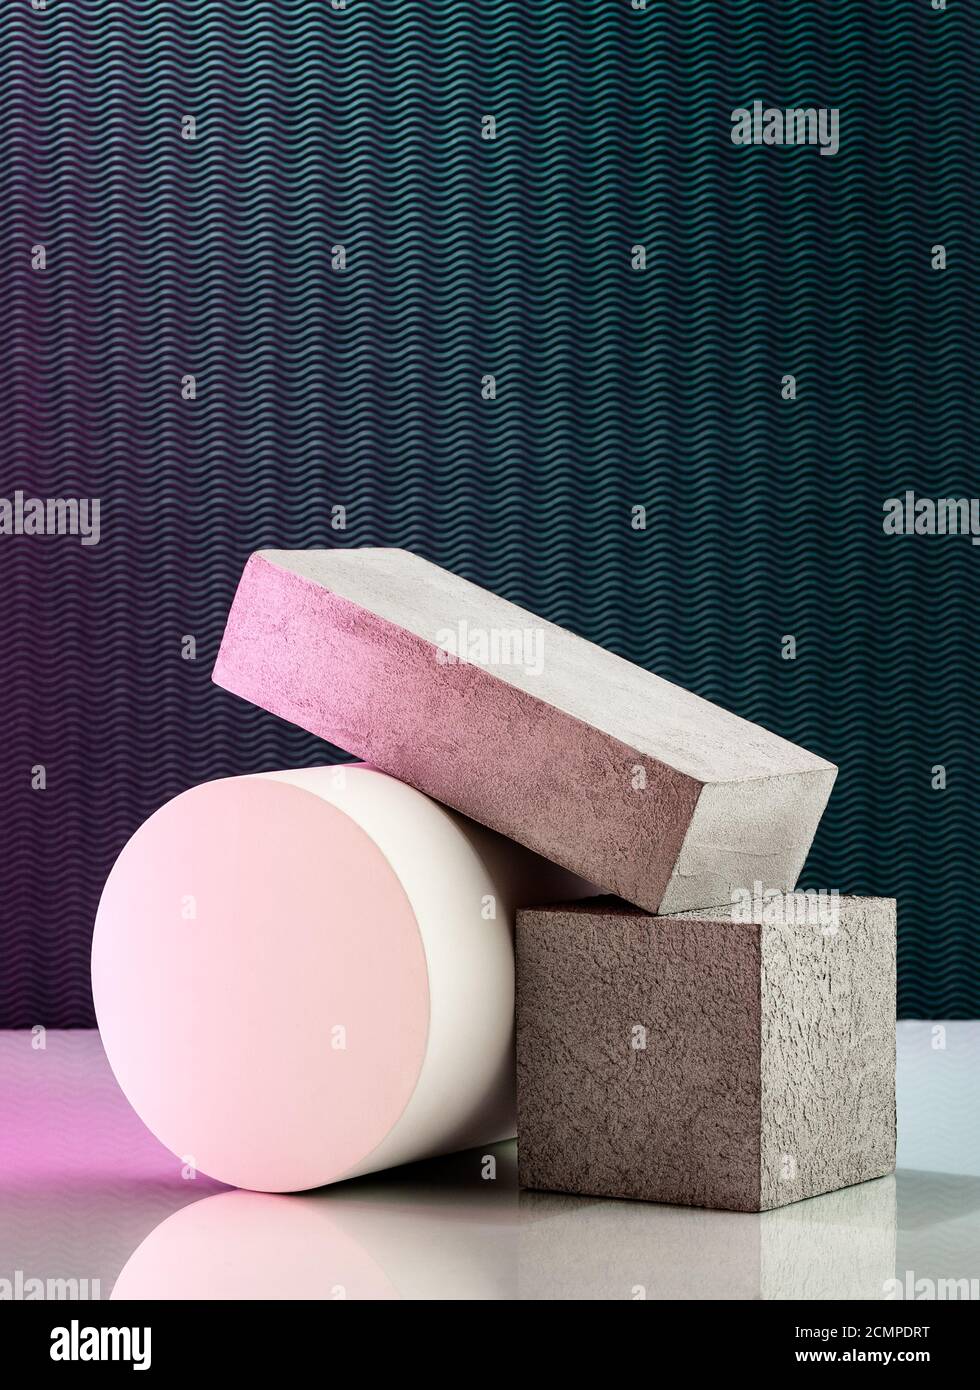 Art composition of volumetric geometric shapes on a textural background with artistic lighting. Stock Photo